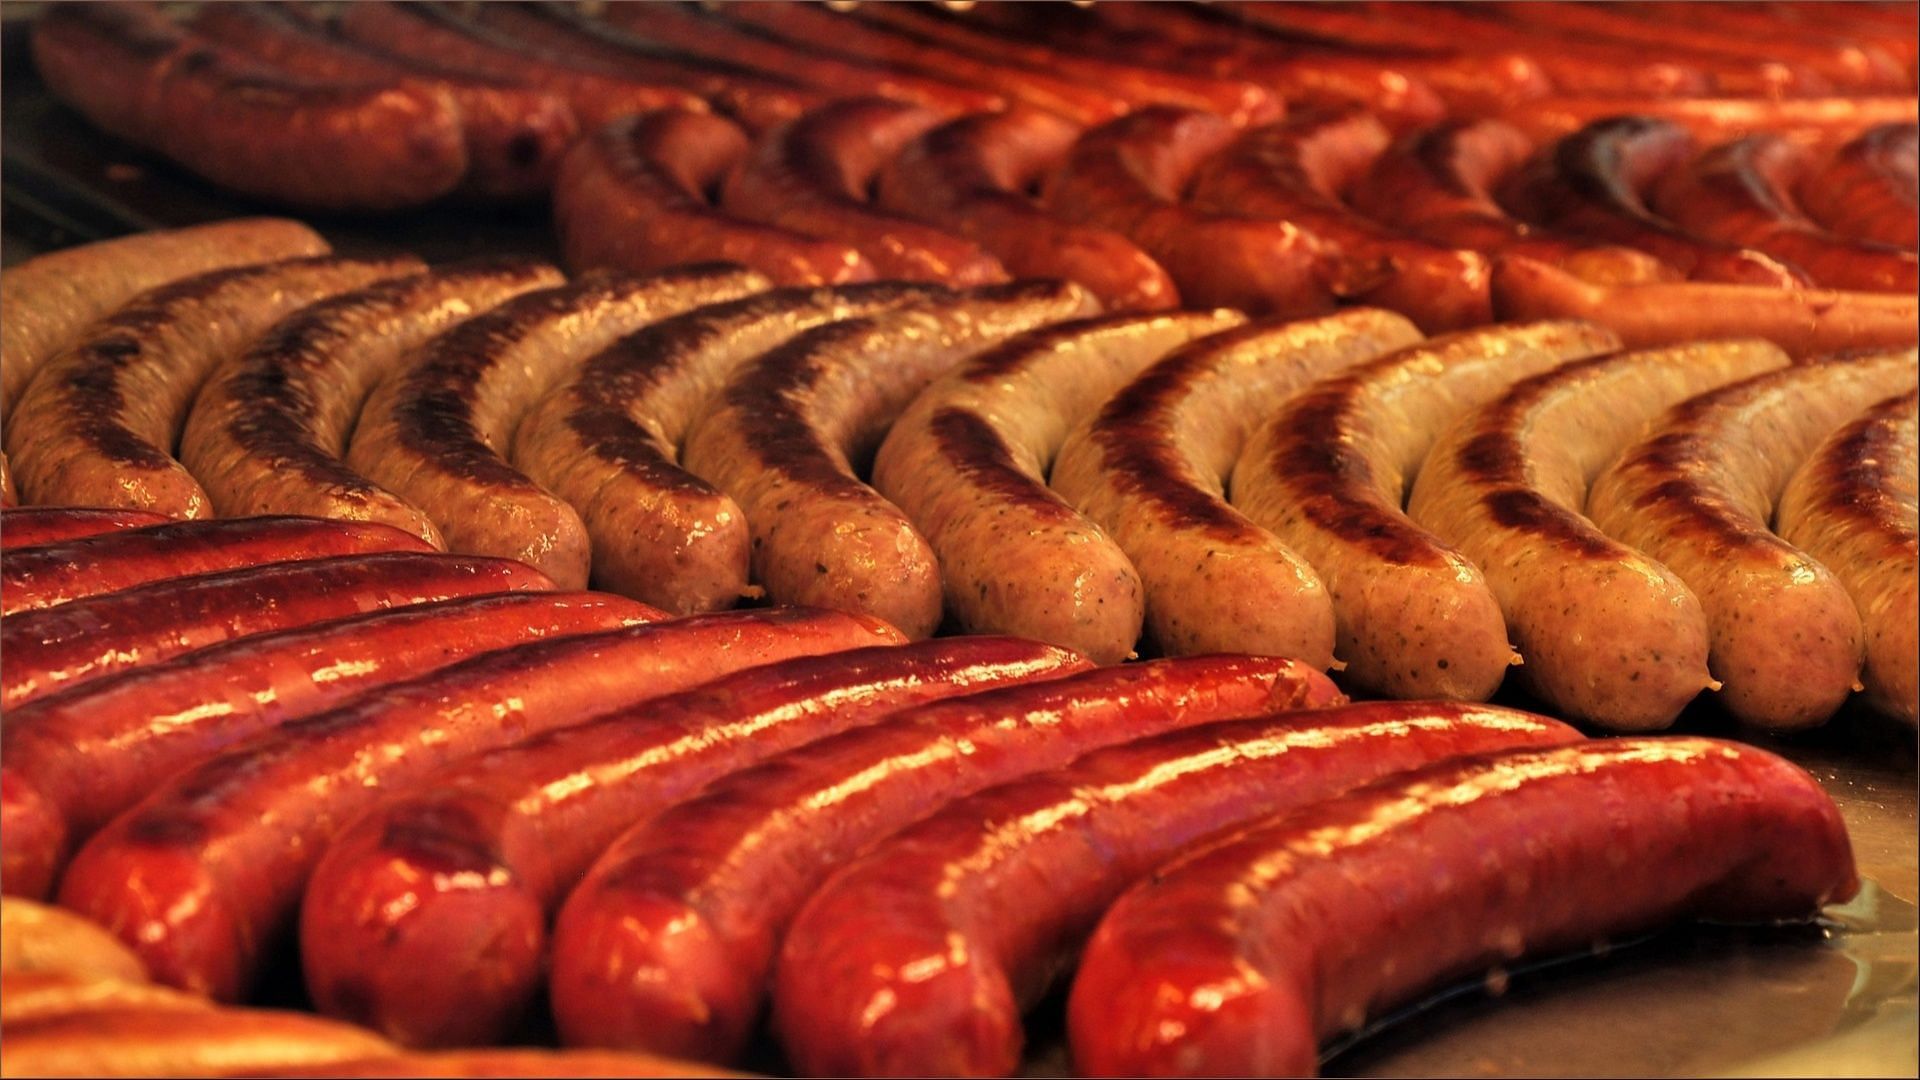 Salm Partners, LLC recalls Johnsonville turkey kielbasa sausage products over foreign material contamination concerns (Image via Charly_7777 / Pixabay)